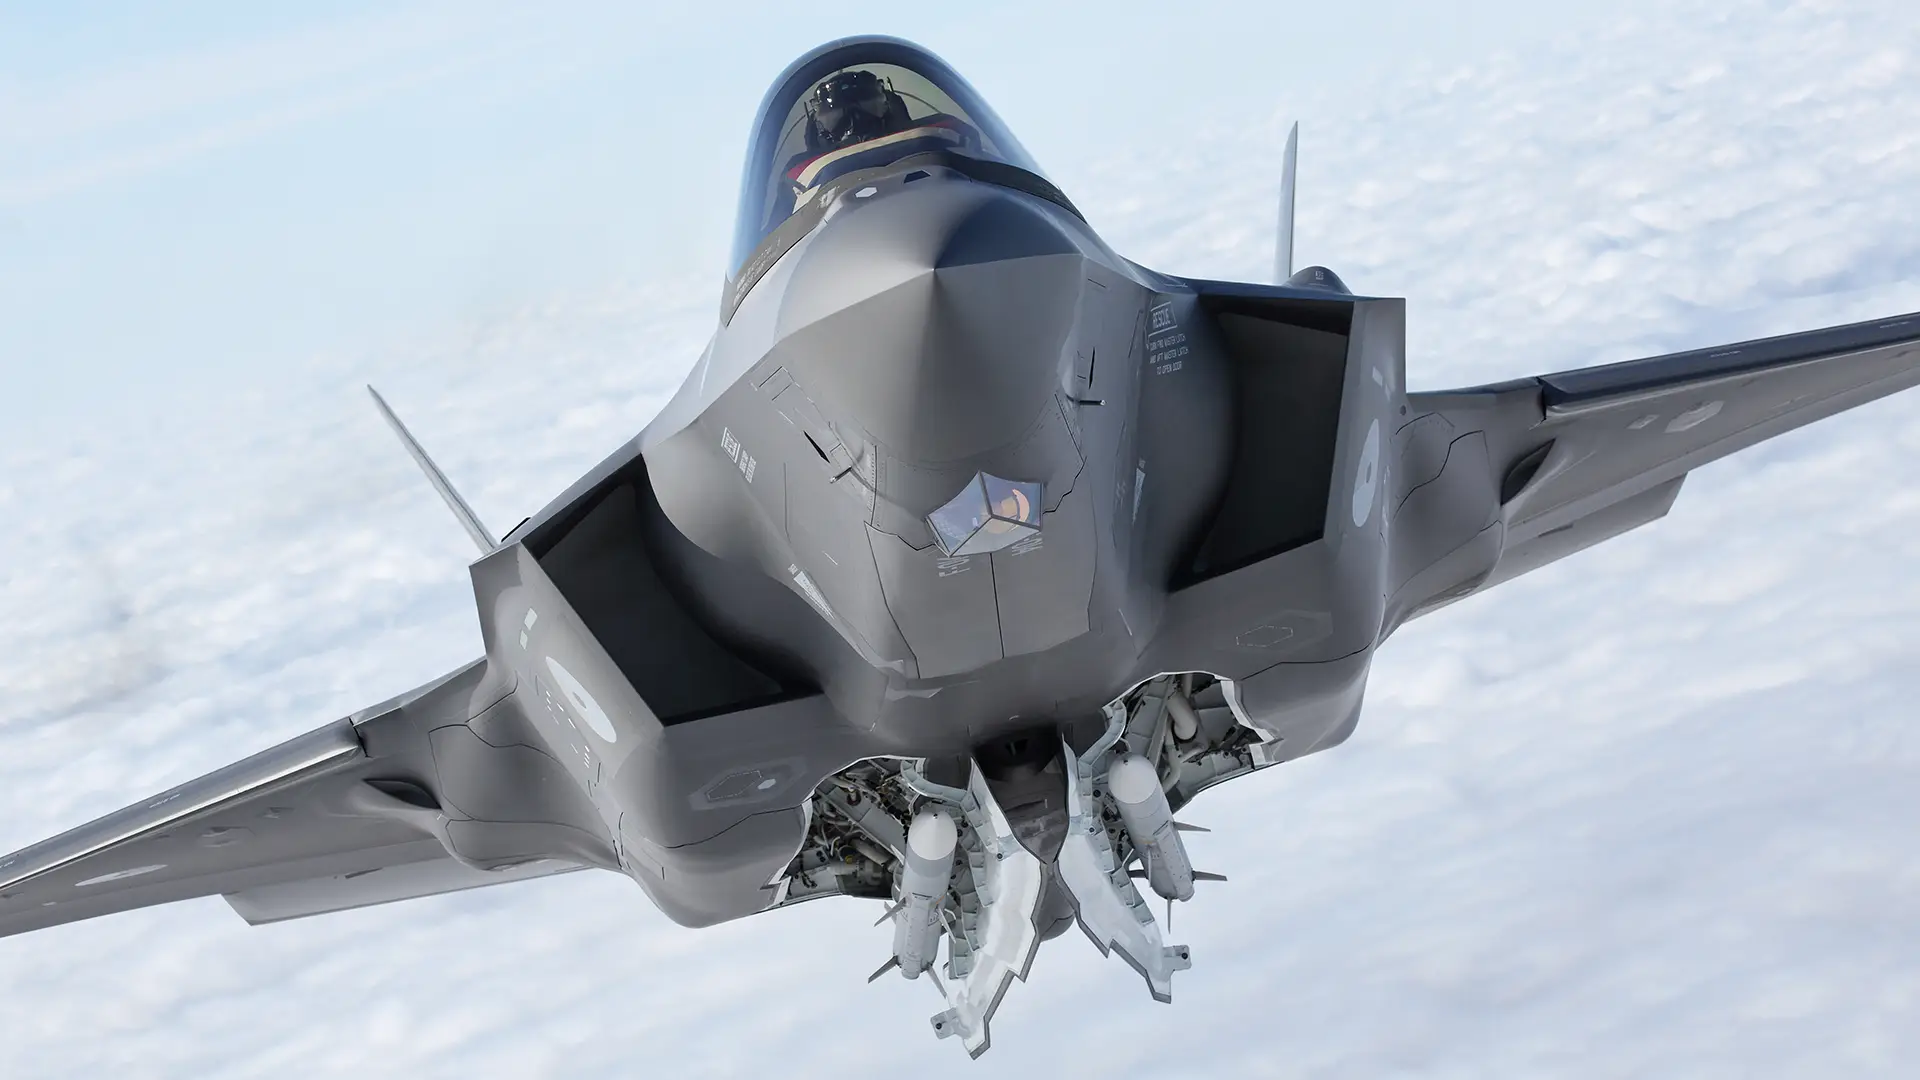 Lockheed Martin develops new compartment layout for F-35A and F-35C - fighters will be able to carry more AIM-120 AMRAAM missiles